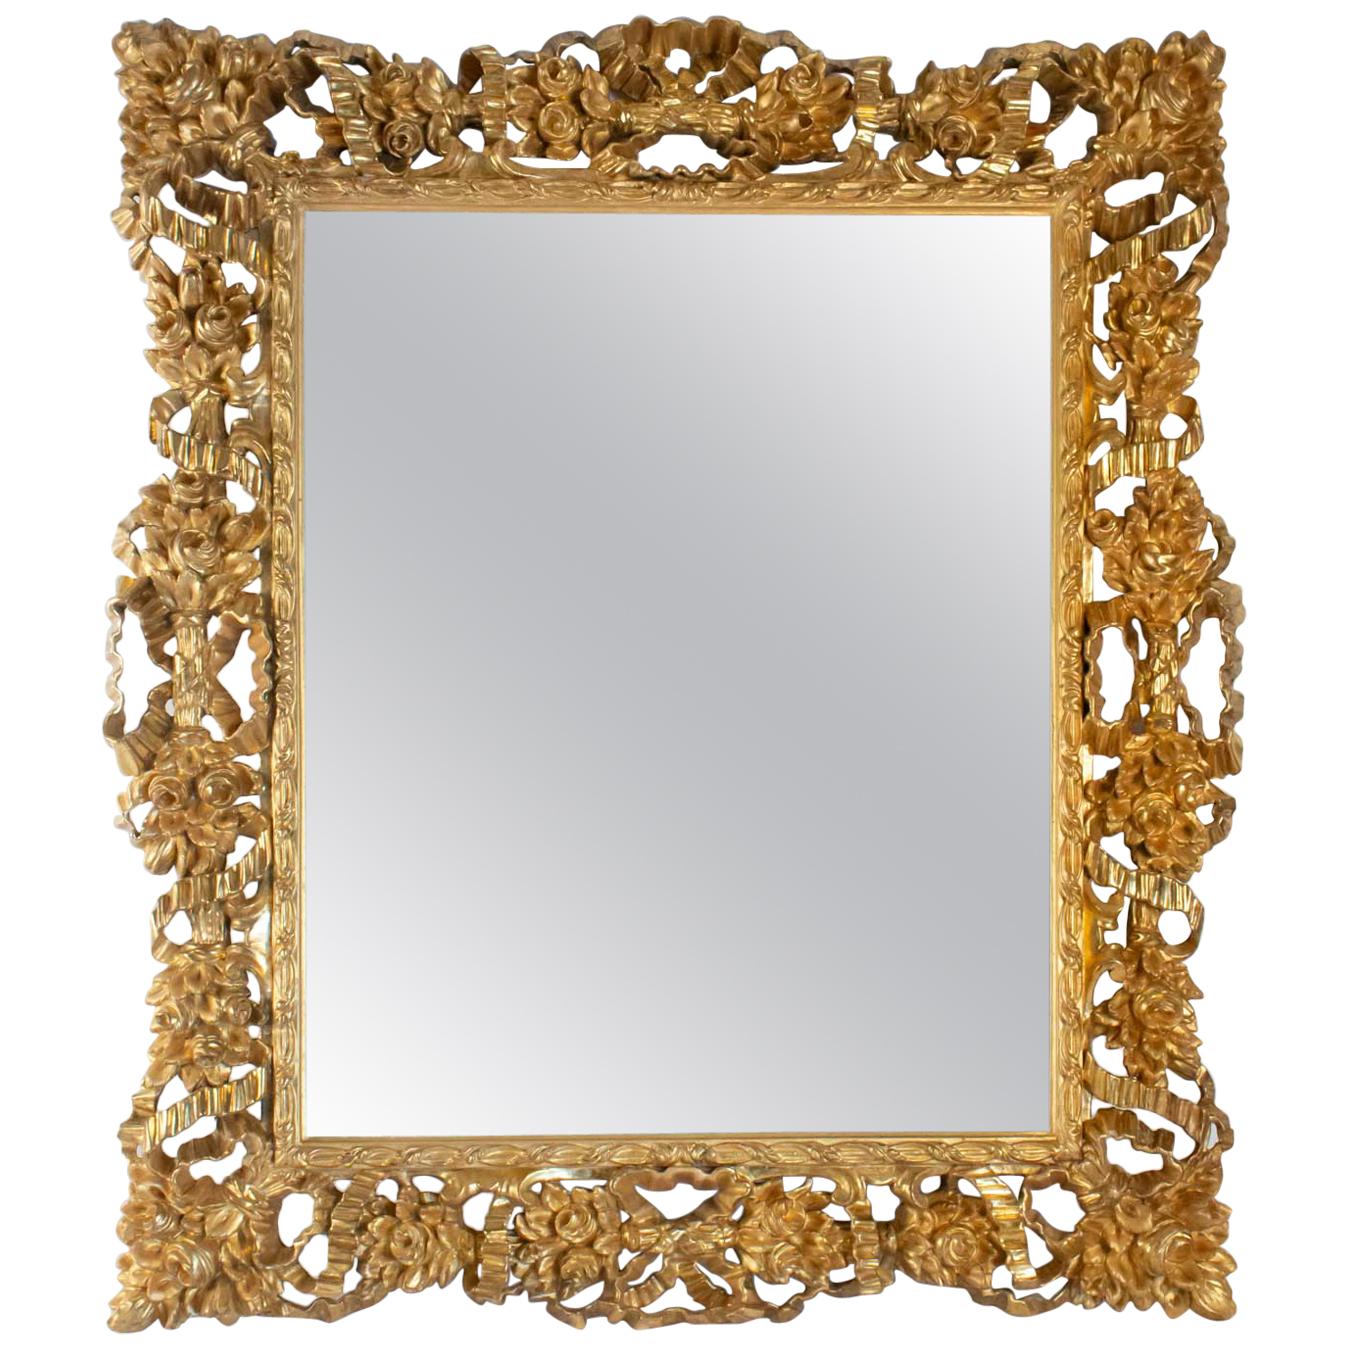 Important Napoleon III Mirror in Carved and Gilded Wood from the 19th Century